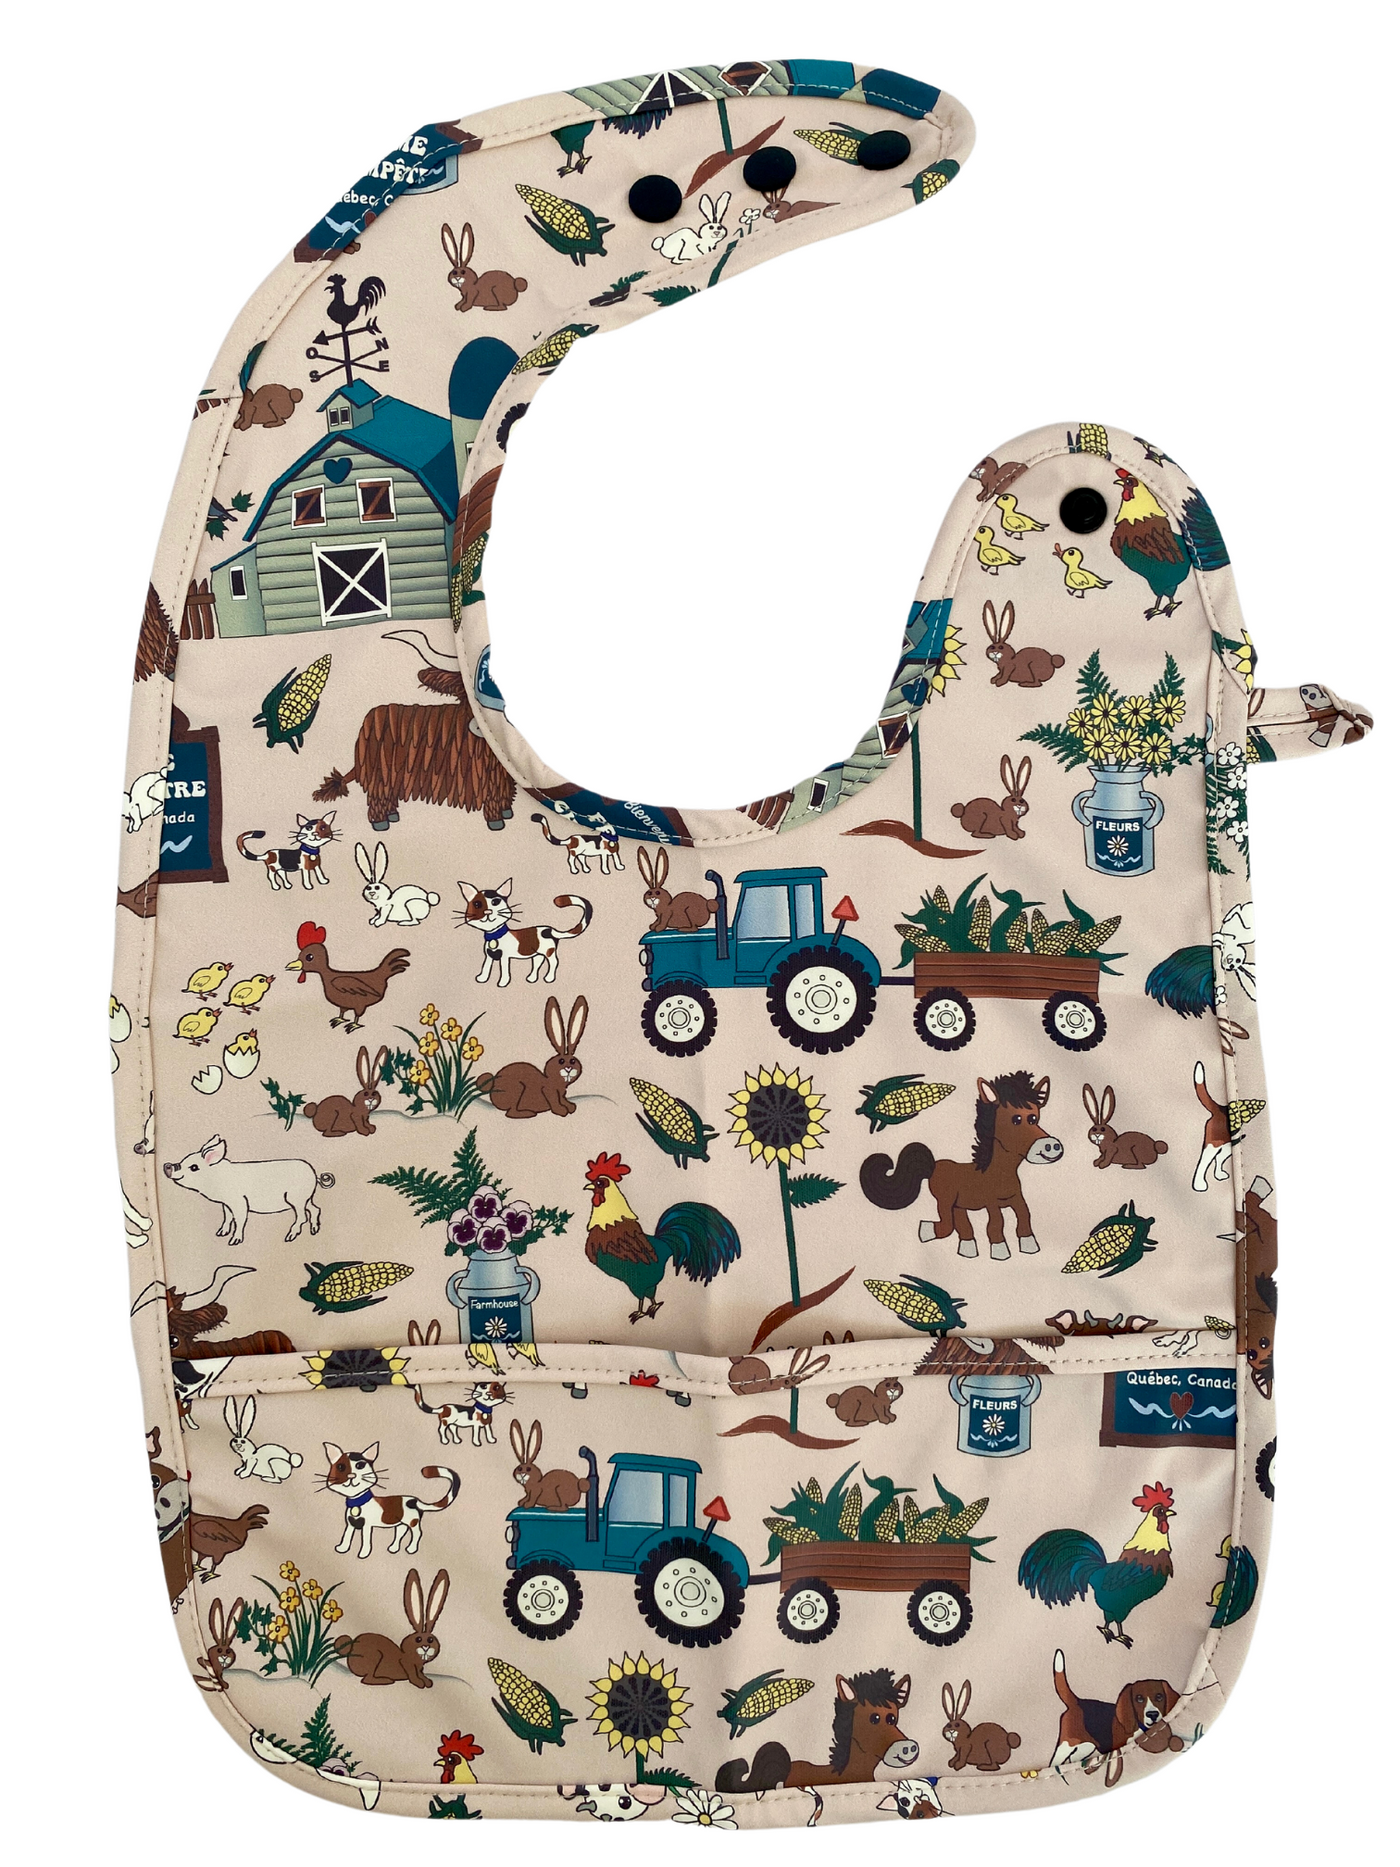 Waterproof Bib with Pocket: Teal Country Farmhouse